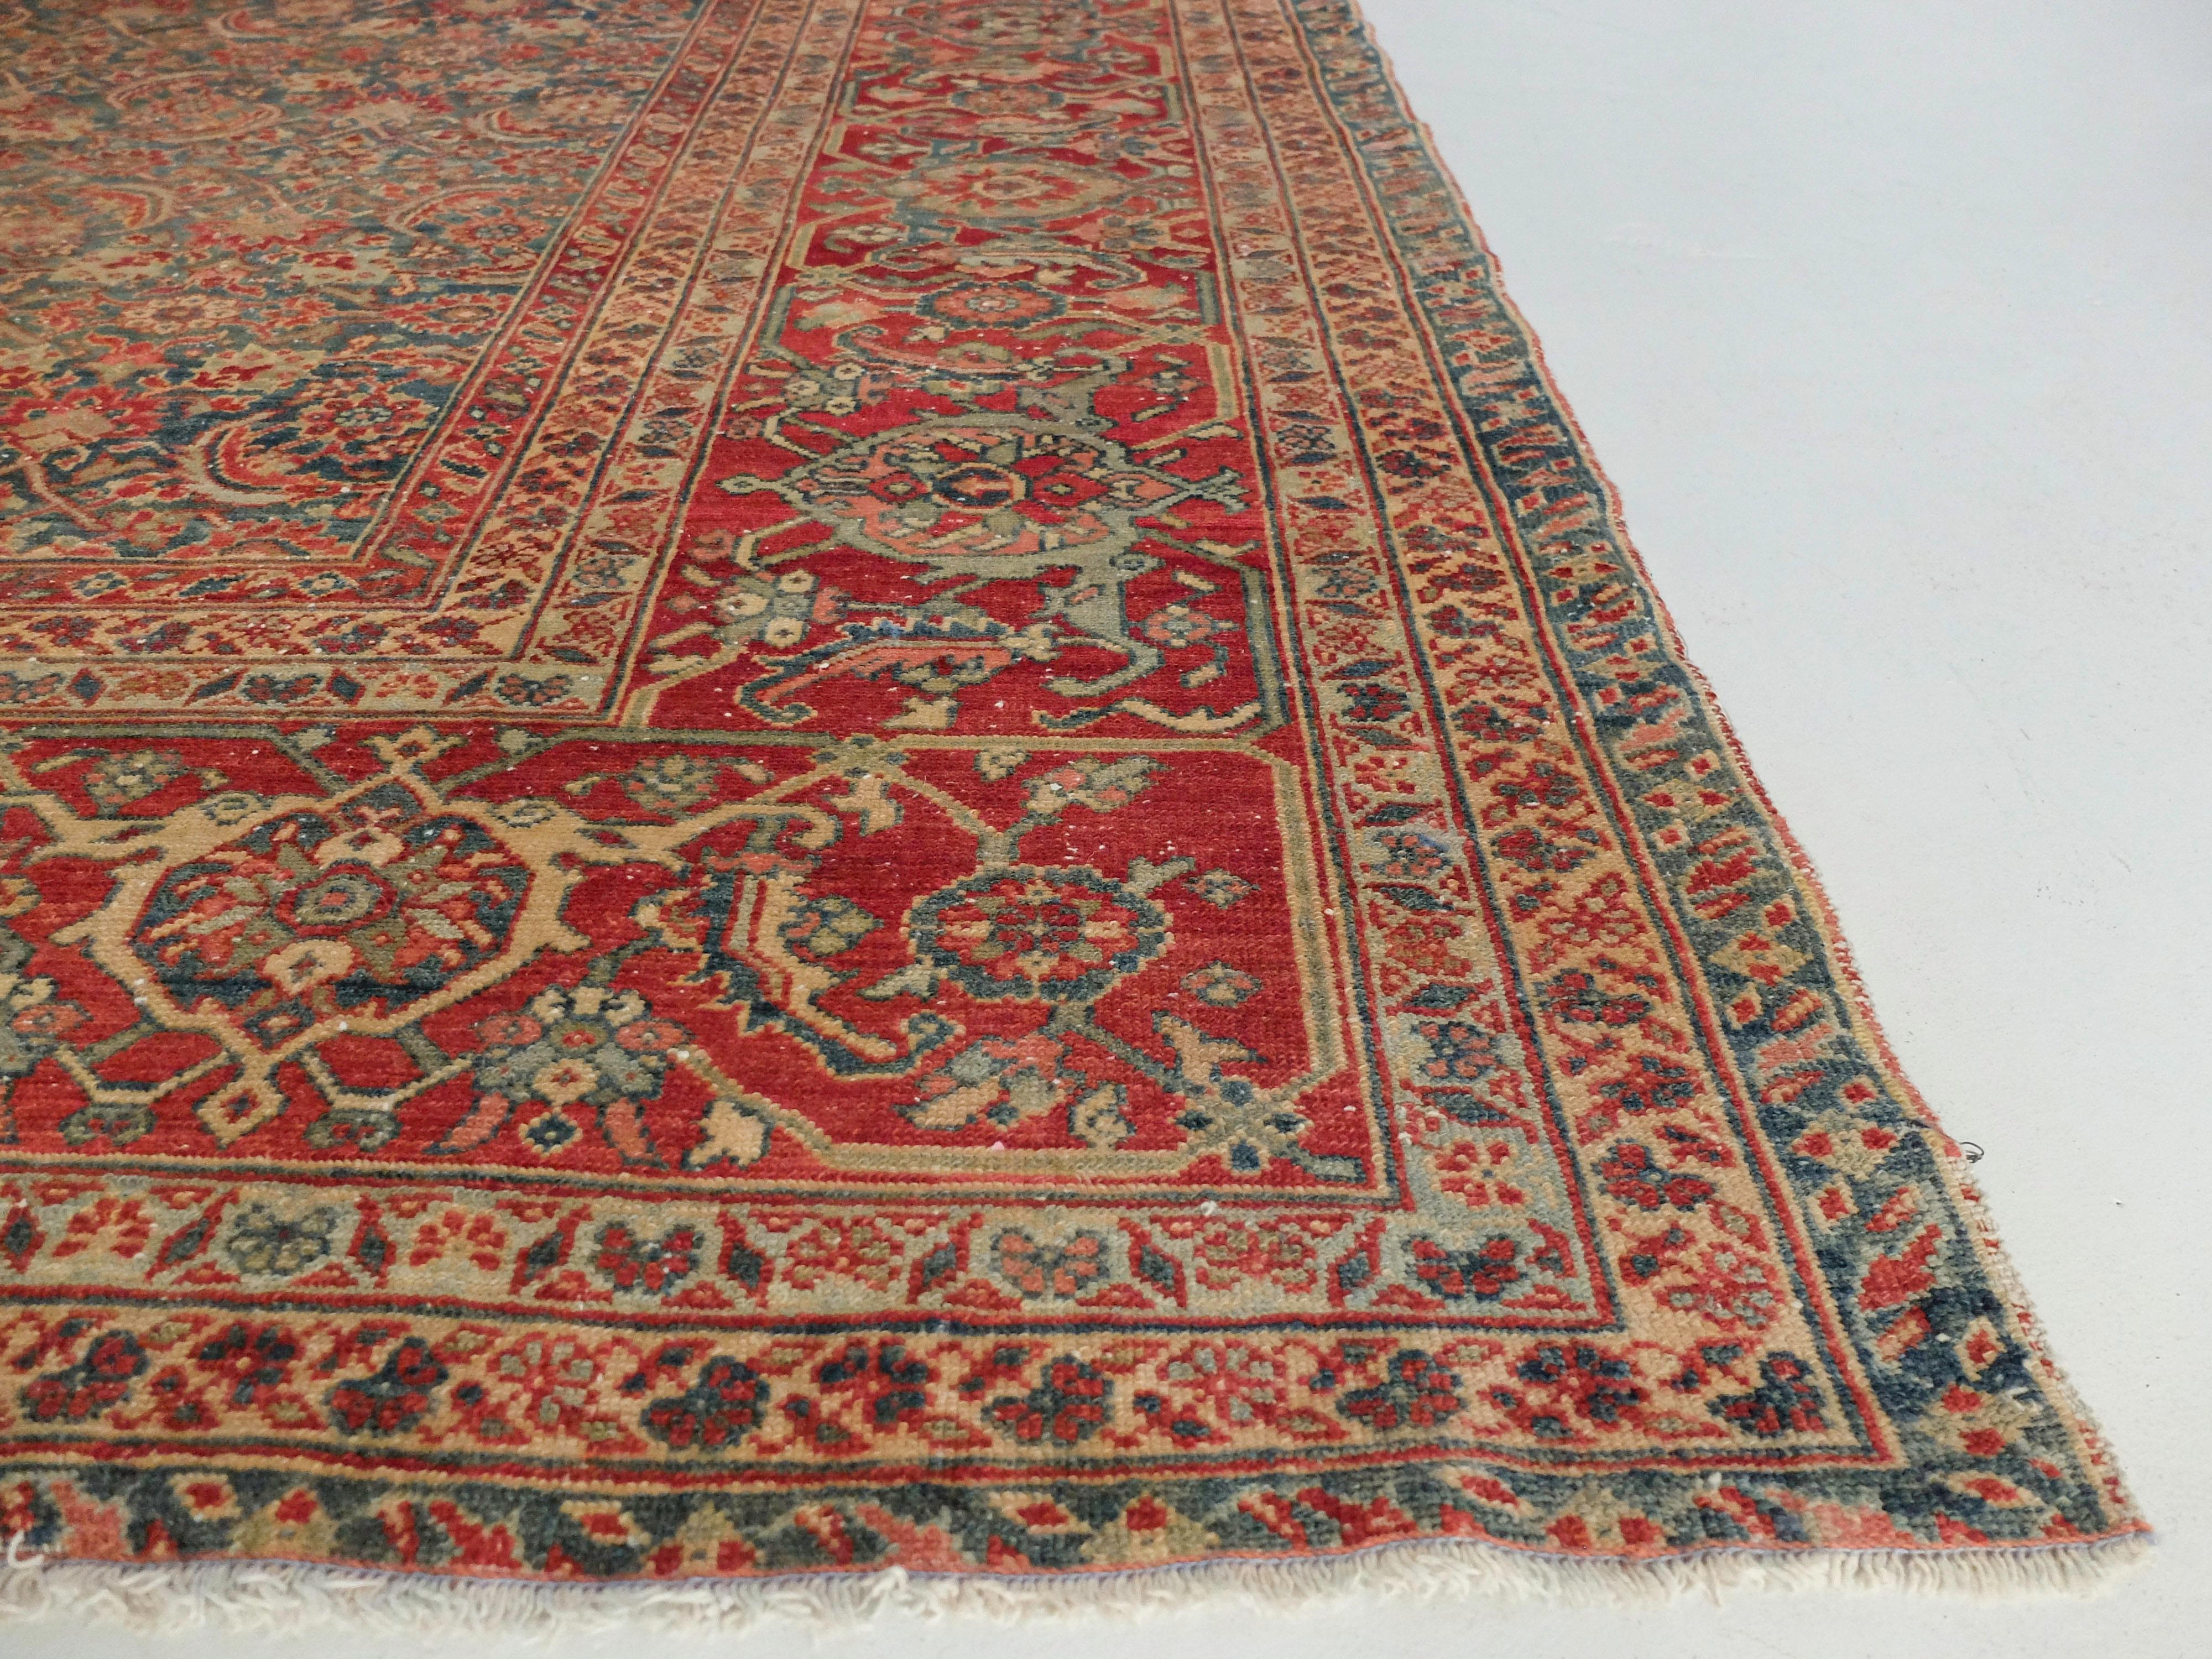 This Ziegler Mahal has an all-over design with intricate floral and natural patterns. It then has a subtle border displaying the deep red color. 

Ziegler Mahal carpets were produced by the British-Swiss Company Ziegler & Co. This style often